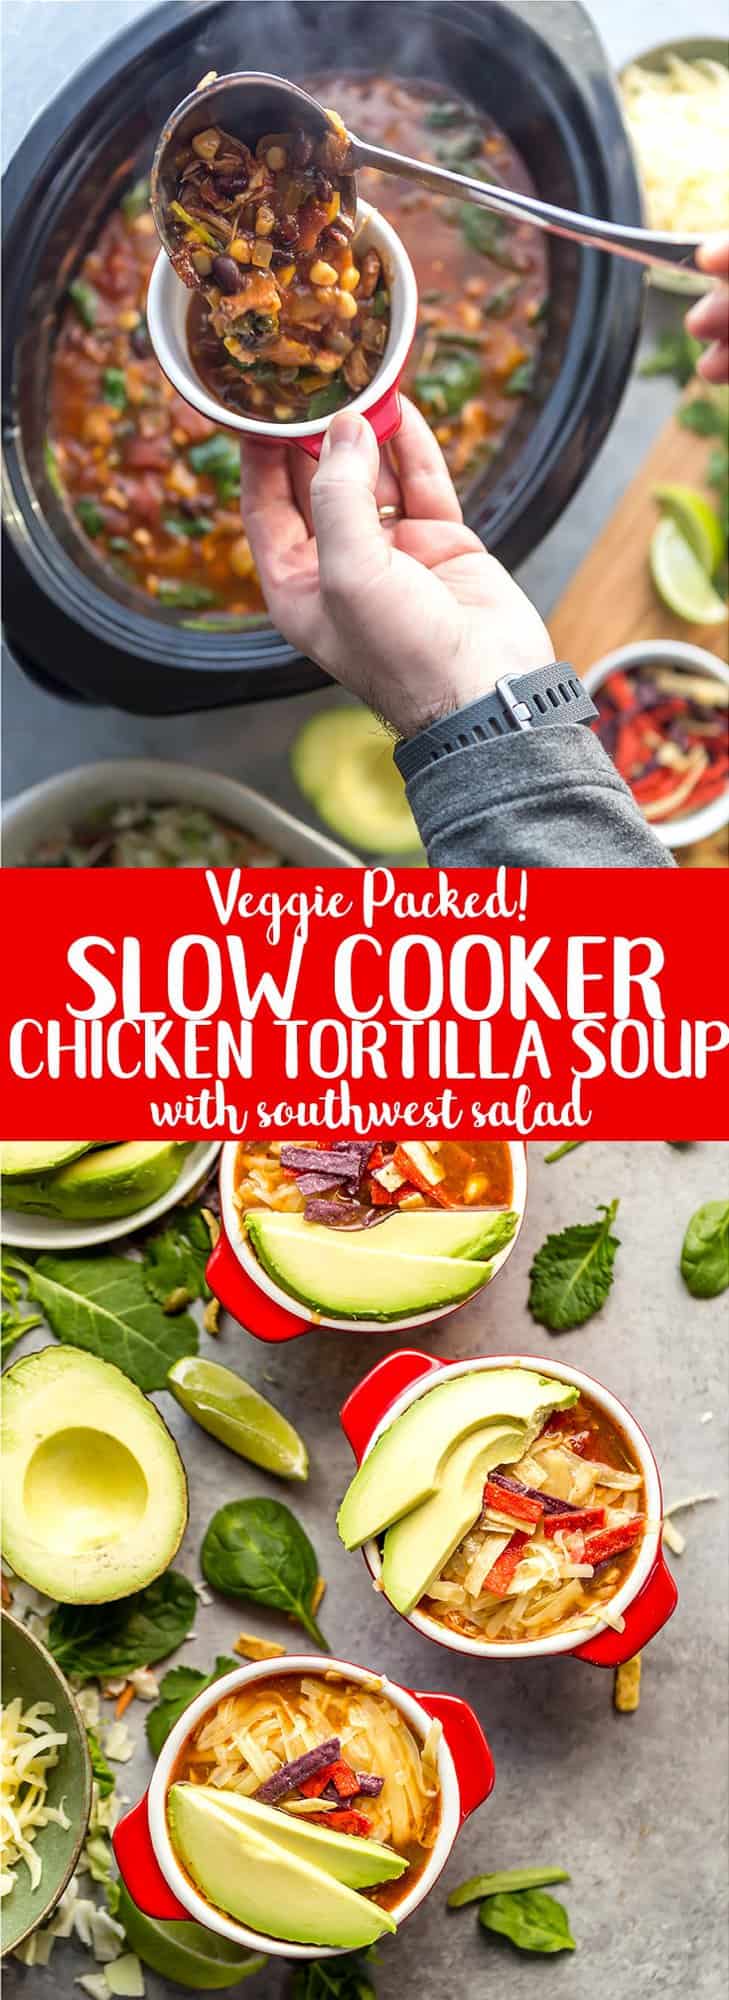 Veggie Packed, Healthy Slow Cooker Chicken Tortilla Soup and Southwest Salad | Crock Pot Chicken Tortilla Soup | Easy Chicken Tortilla Soup | Veggie Packed Meals | Easy Weeknight Dinner | Easy Meal to serve a crowd | Low Carb Chicken Tortilla Soup | Black Beans | Avocados | Lime Juice | Corn | Chicken Tortilla Soup Recipe #ad #GotoGreens #TaylorFarms